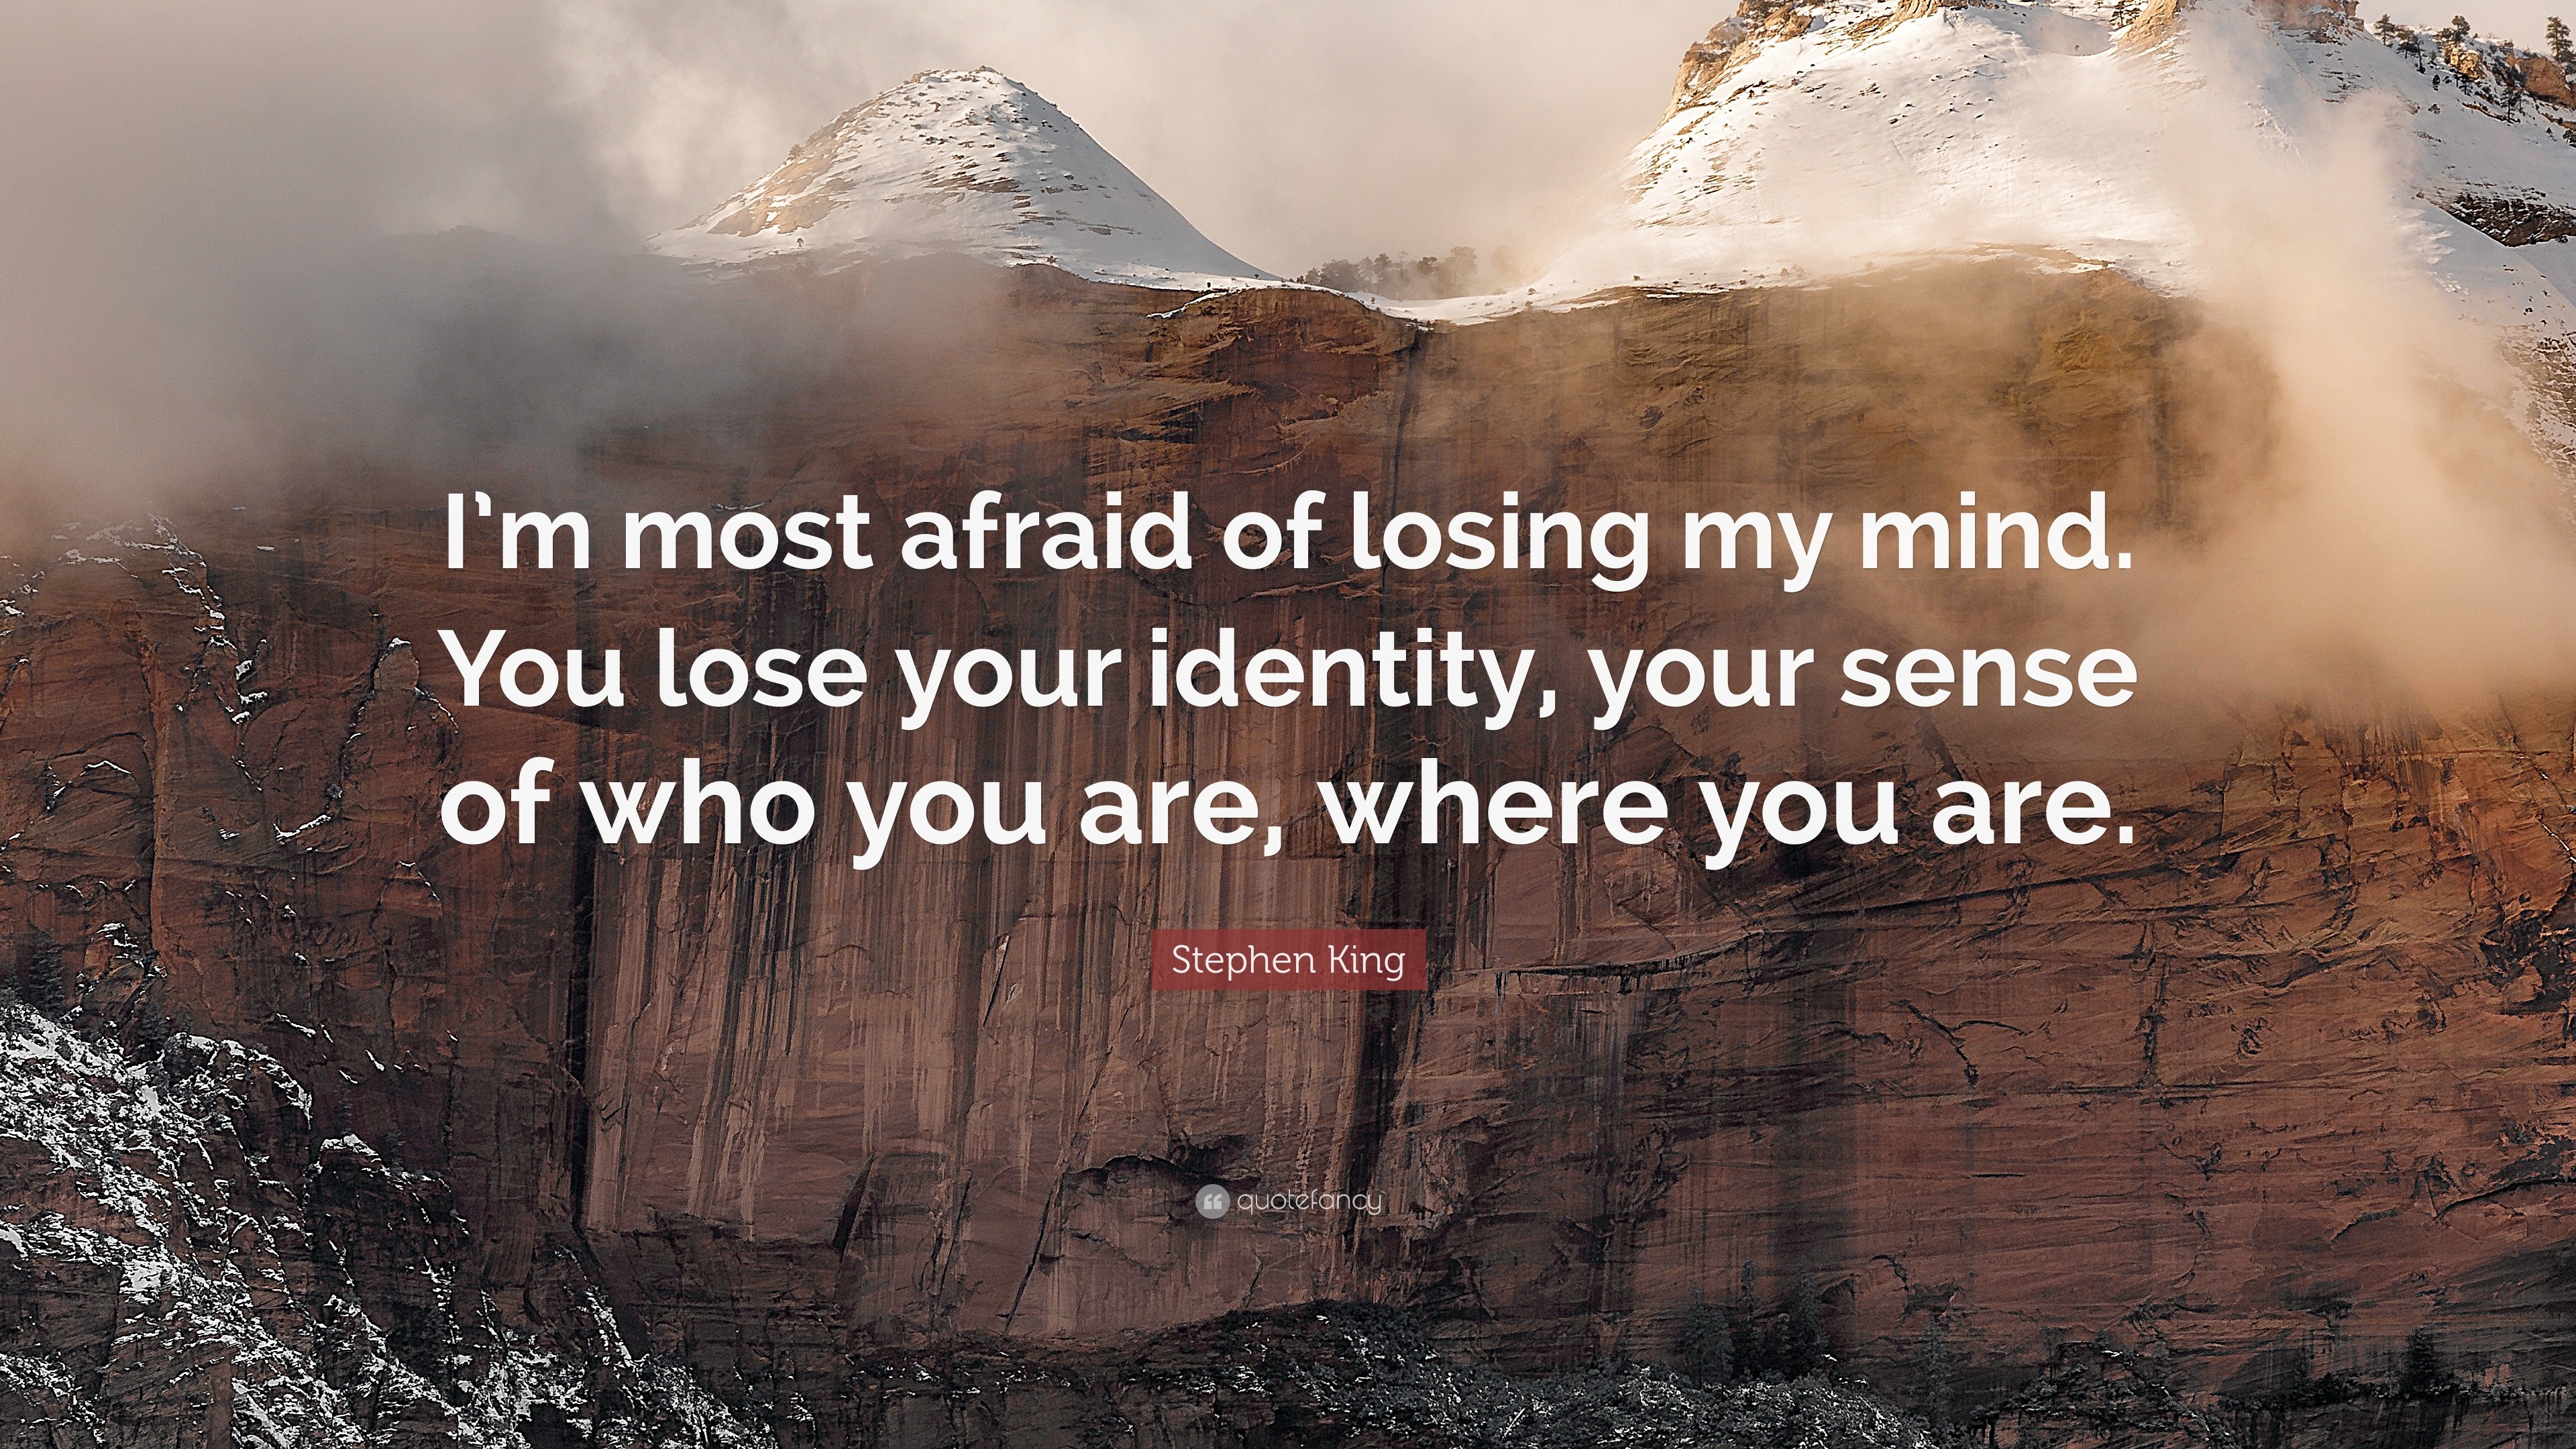 Stephen King Quote: “I’m most afraid of losing my mind. You lose your ...